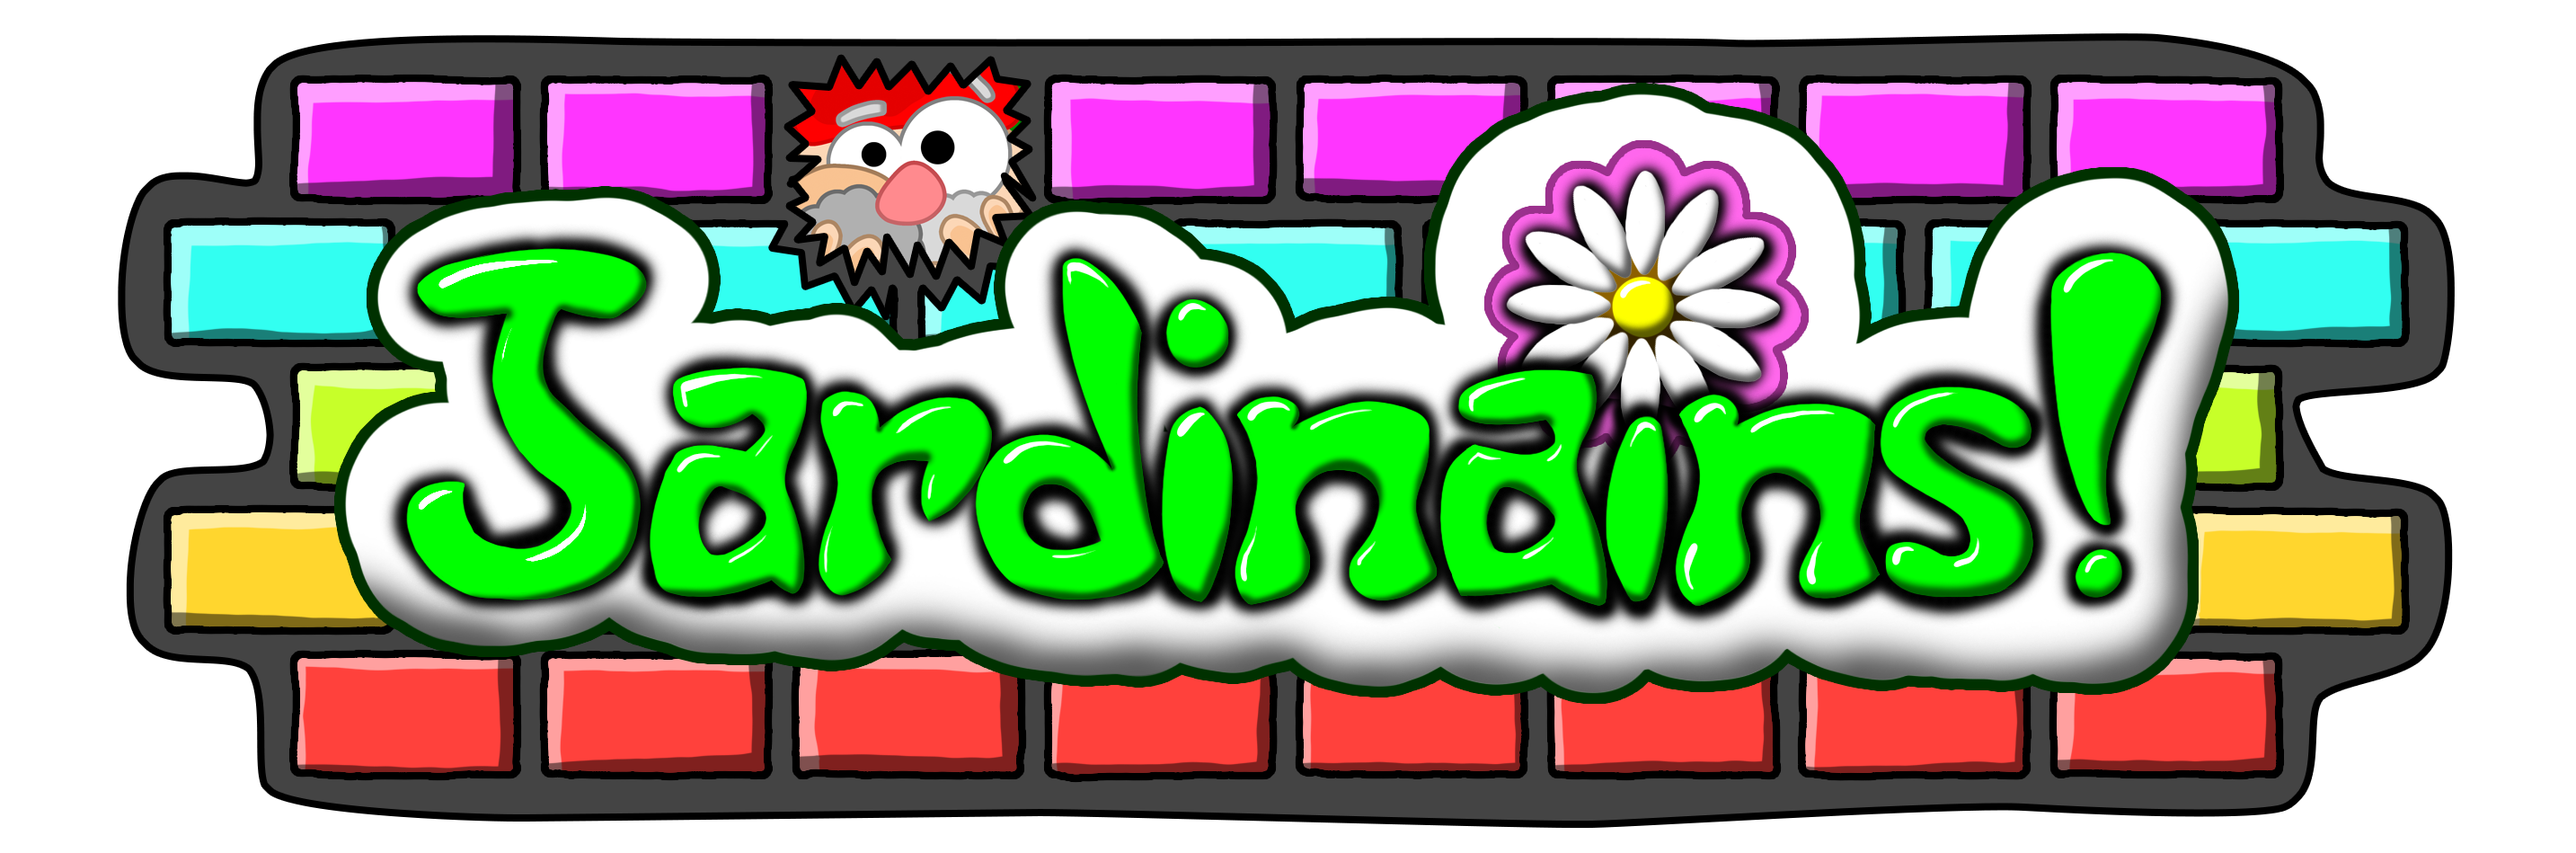 Jardinains promo screen: an image showing the Jardinains! logo on a brick background. A nain is poking its head through a hole in the brick background.